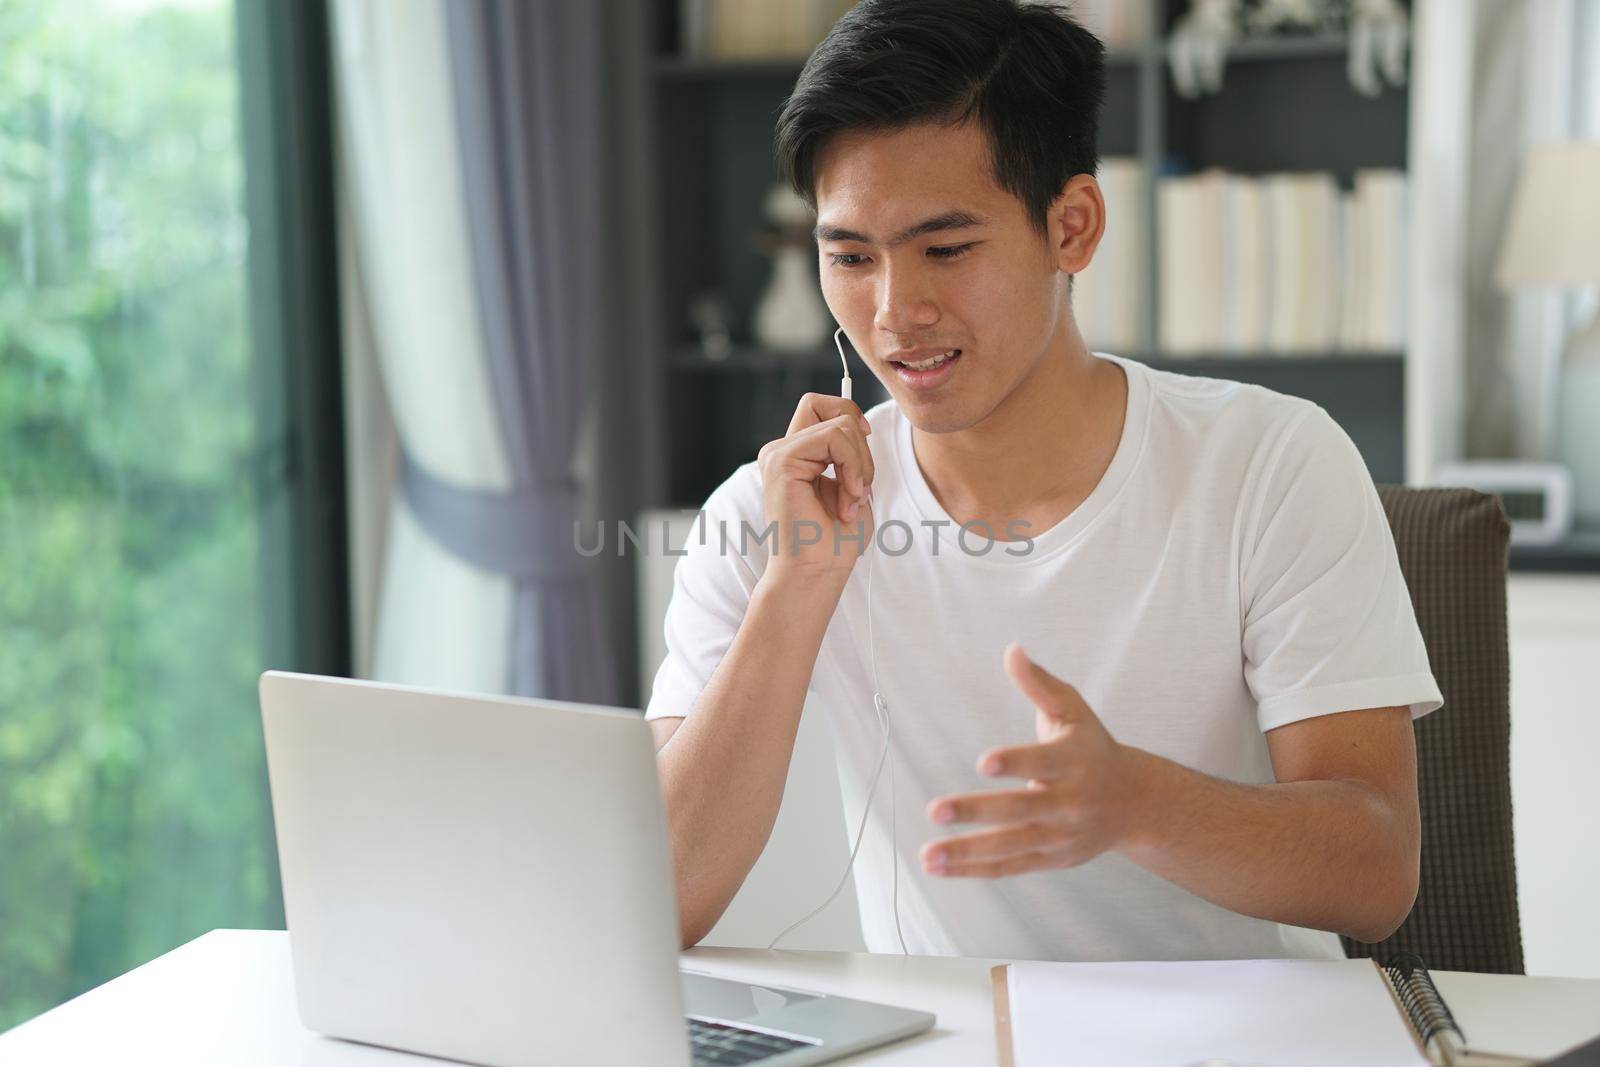 asian young teenage student man entrepreneur wear earphones working by video call conference studying learning online at home. e-learning webinar meeting. social distance in covid pandemic